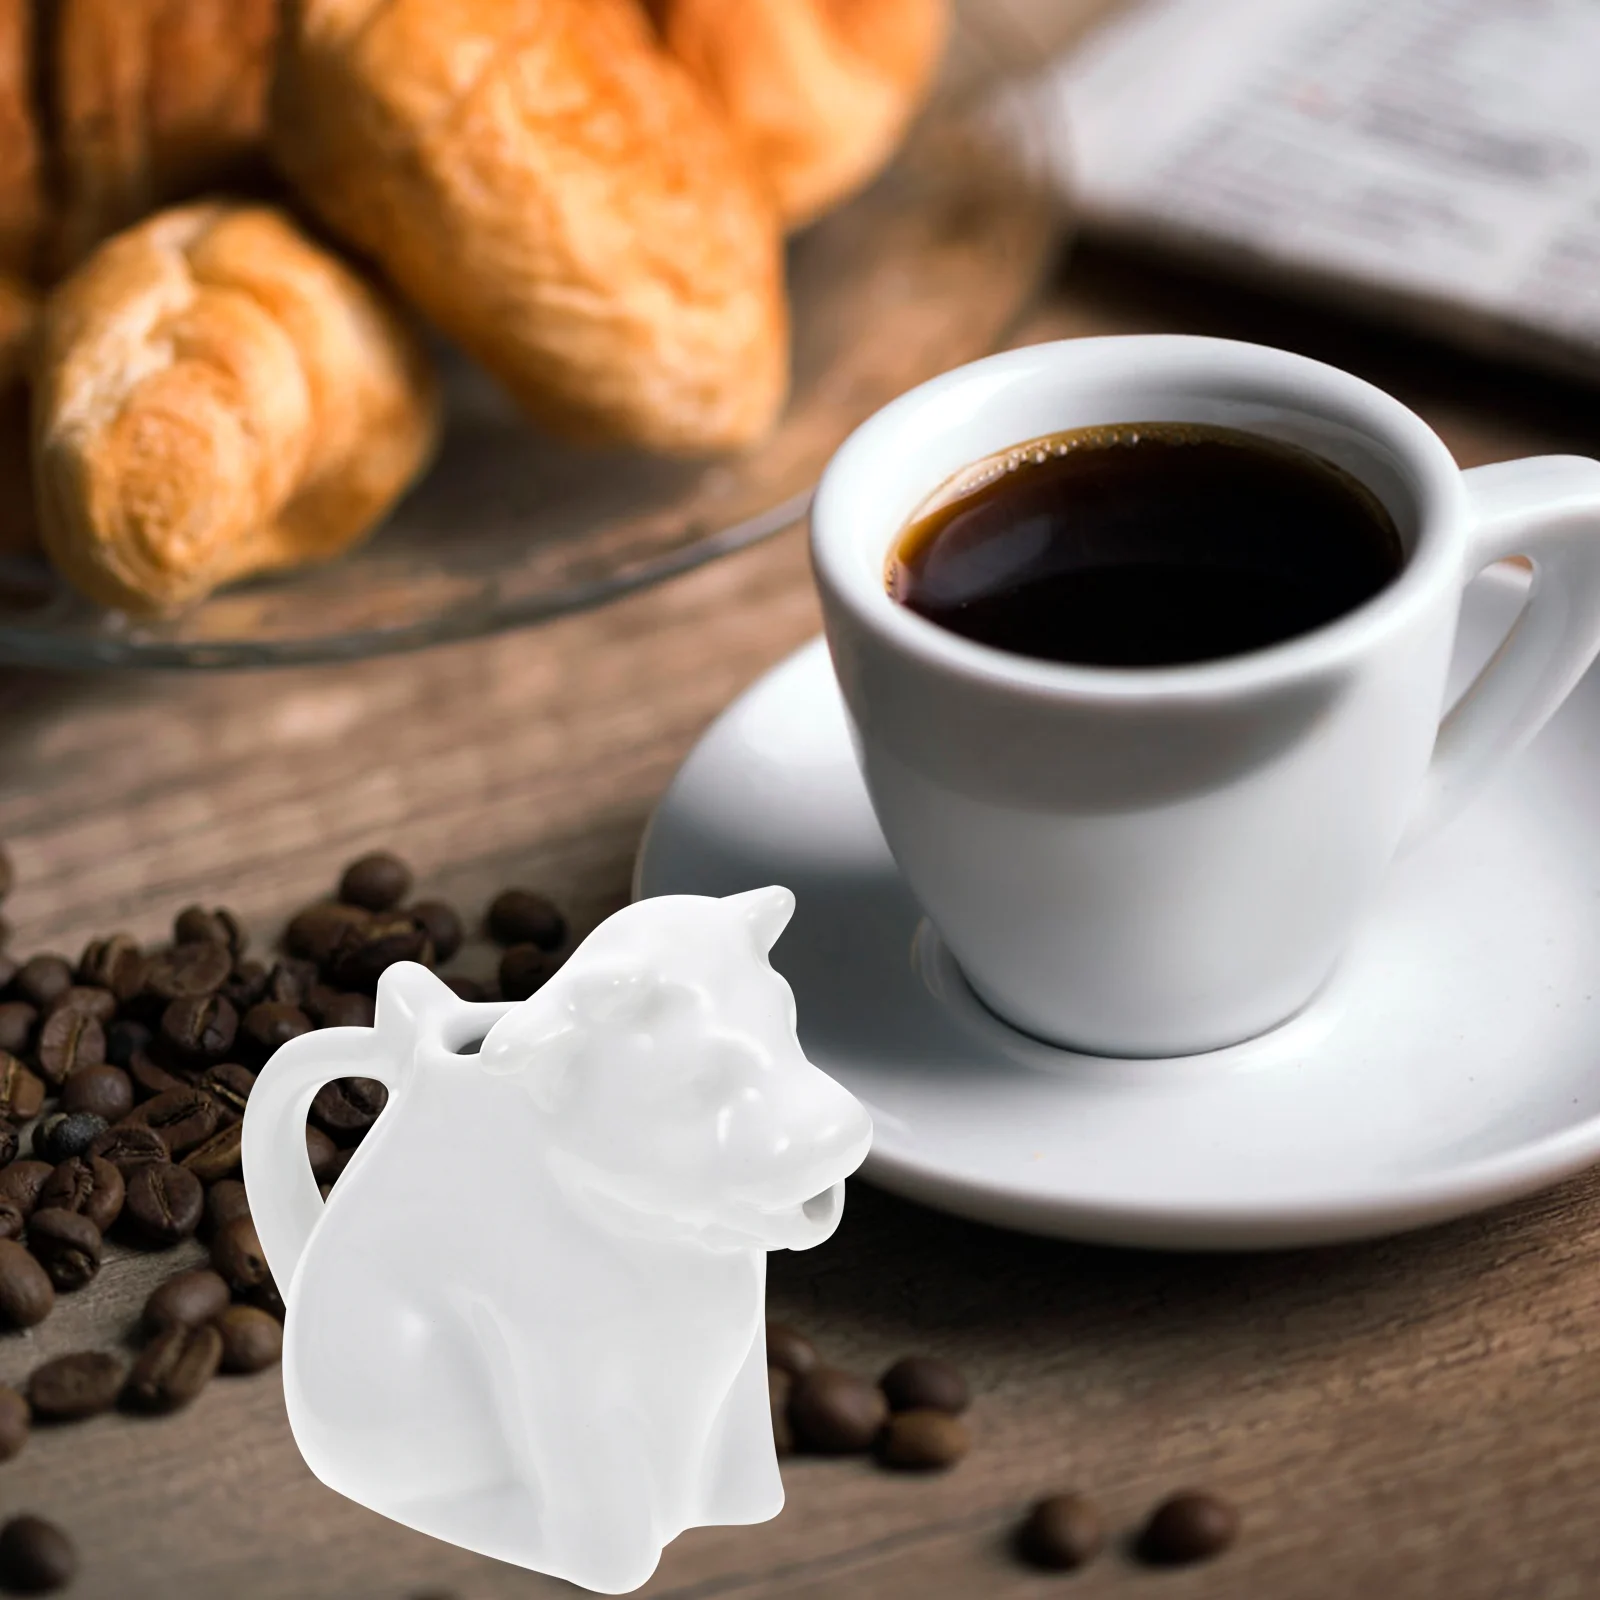 https://ae01.alicdn.com/kf/S01d7bf8b96ff4df181b9f07baf2d50d0C/Pitcher-Creamer-Ceramic-Jug-Sauce-Cow-Gravy-Mini-Cup-Pourer-Cream-Coffee-Frothing-Boat-Syrup-Animal.jpg